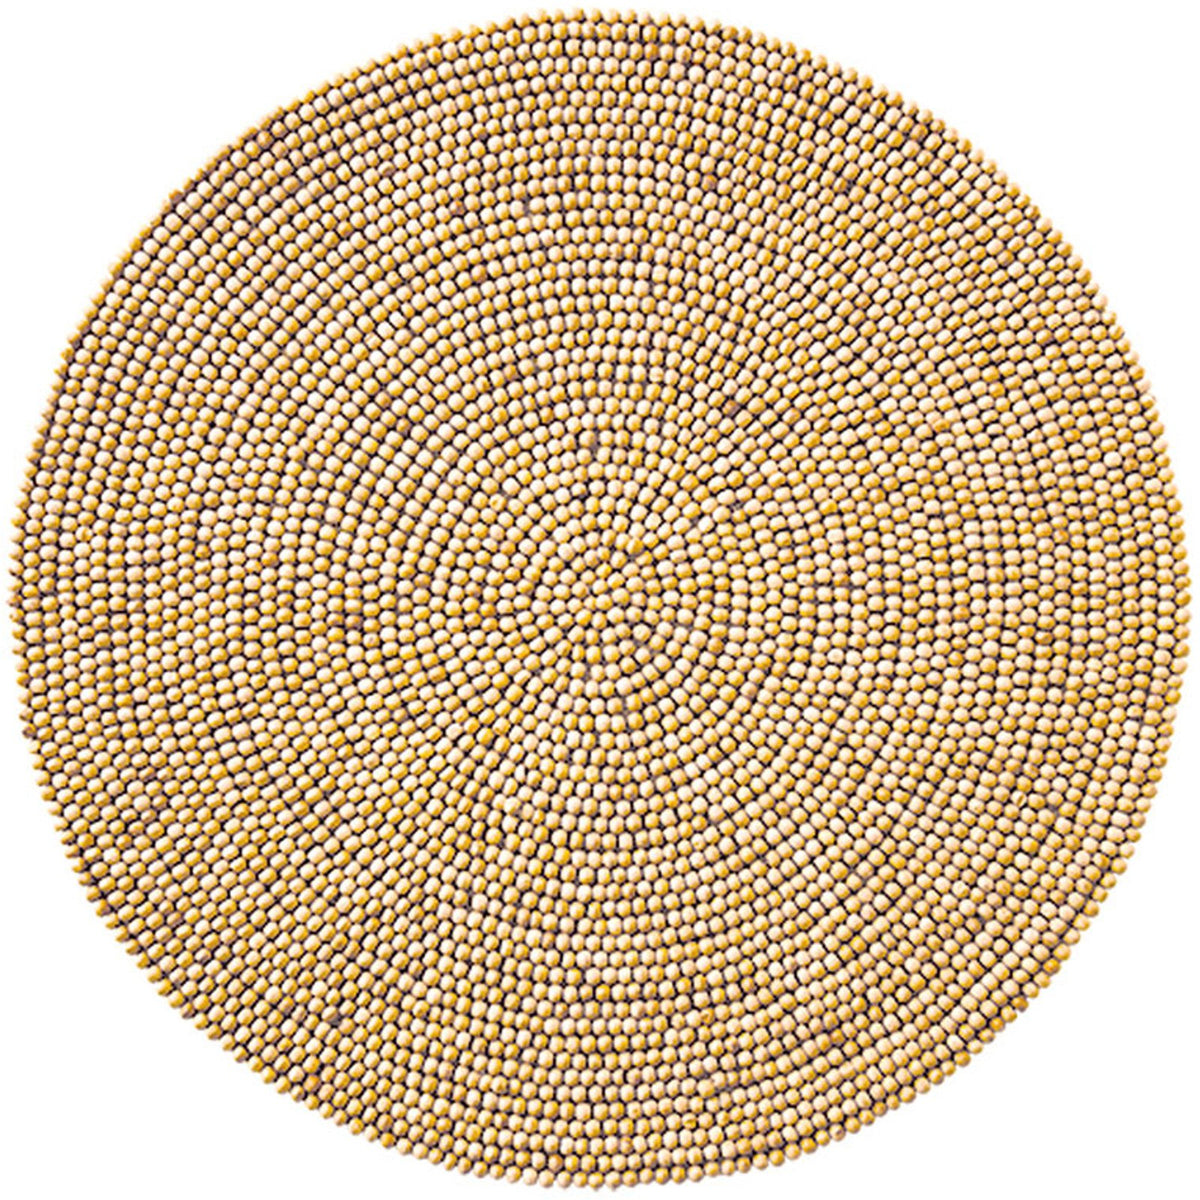 Bead Placemat